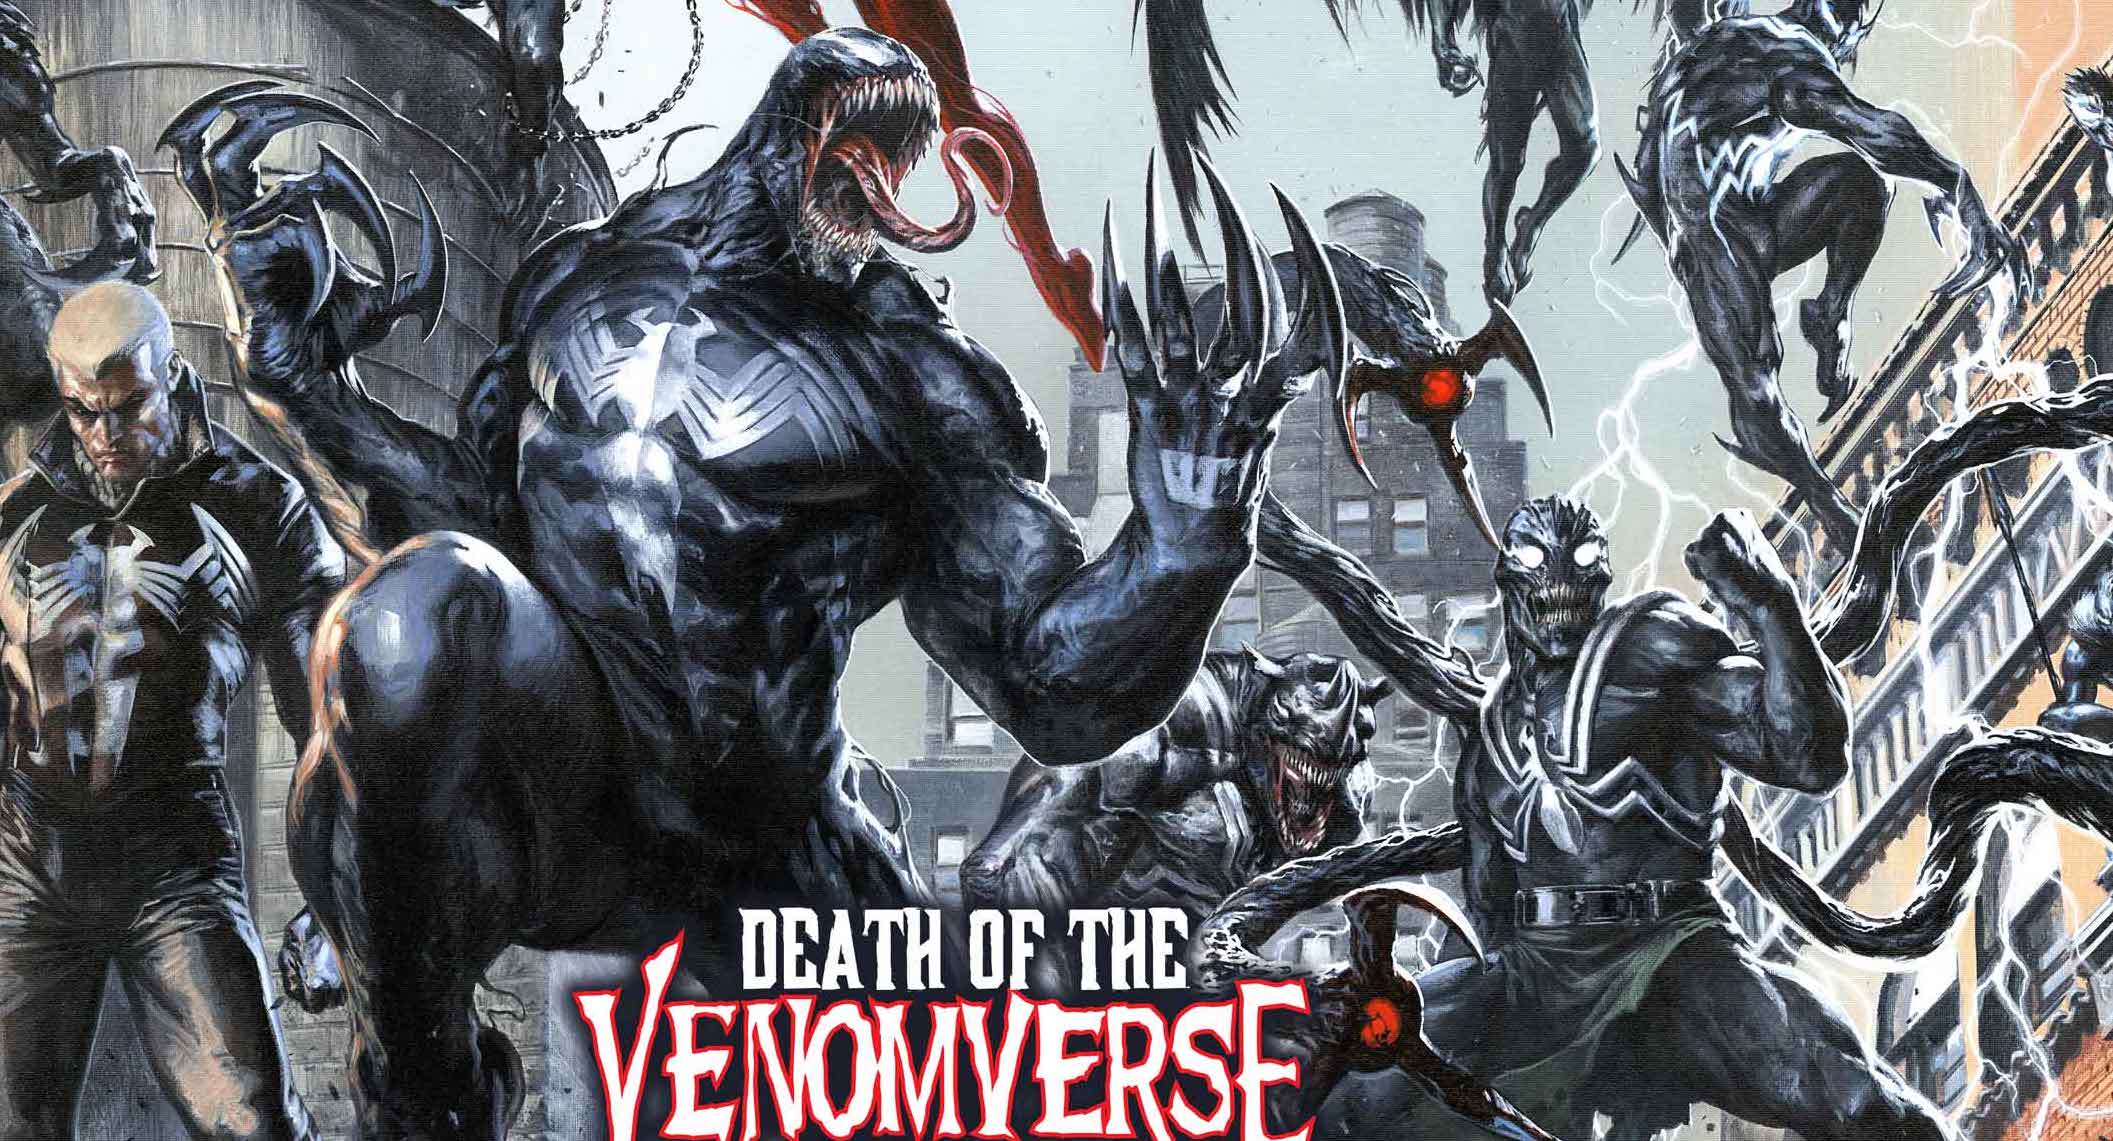 Symbiotes rise in new Gabriele Dell’Otto 'Death of the Venomverse' connecting cover